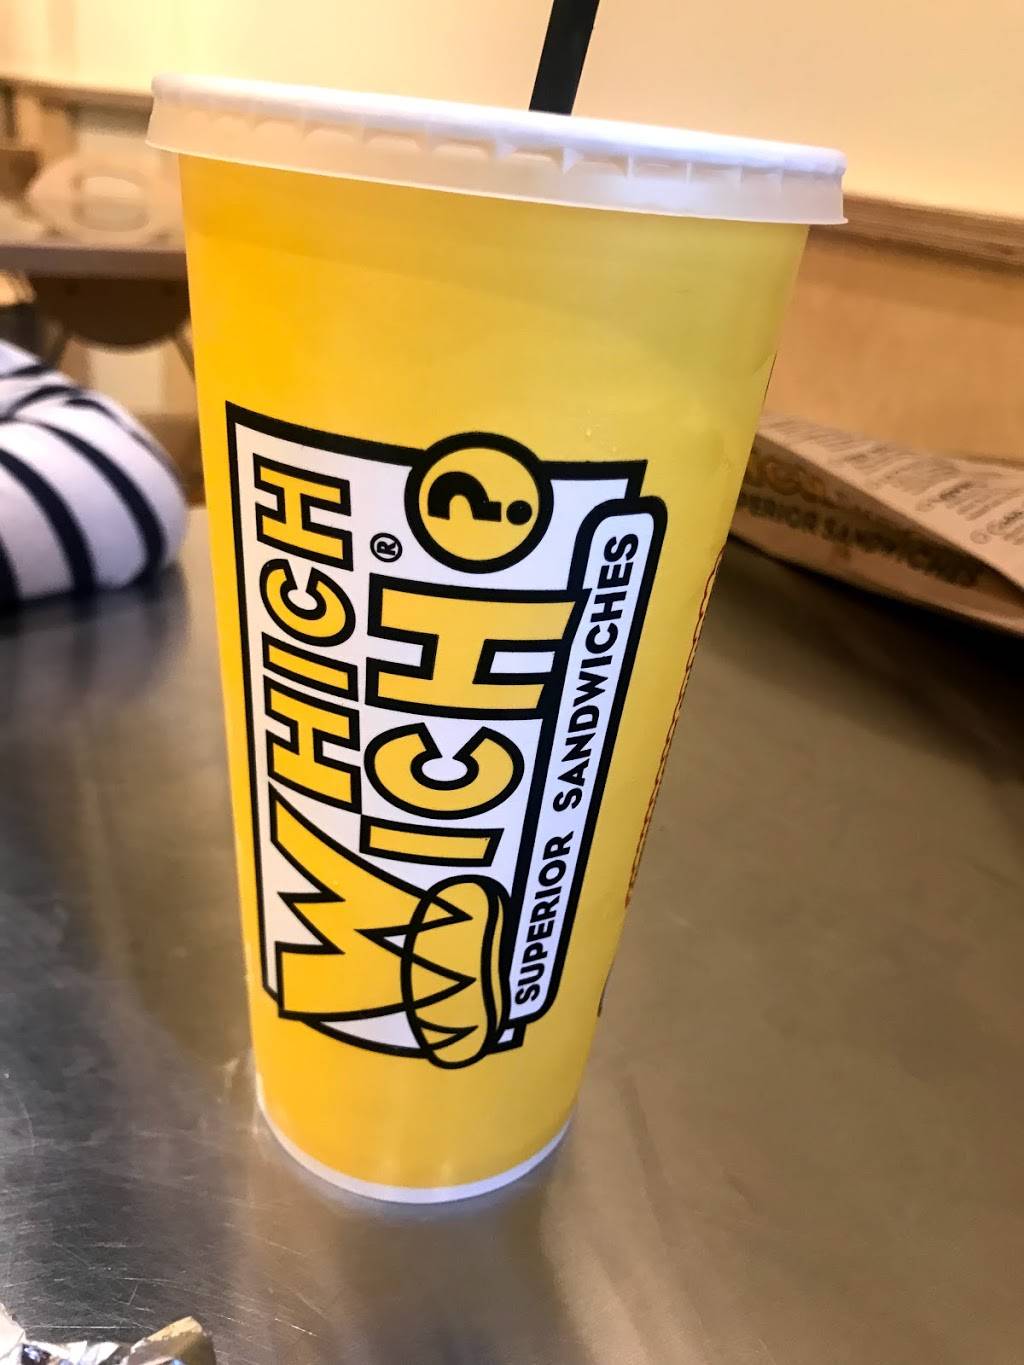 Which Wich Superior Sandwiches | restaurant | 700 Plaza Dr Suite 0135, Secaucus, NJ 07094, USA | 2013258000 OR +1 201-325-8000